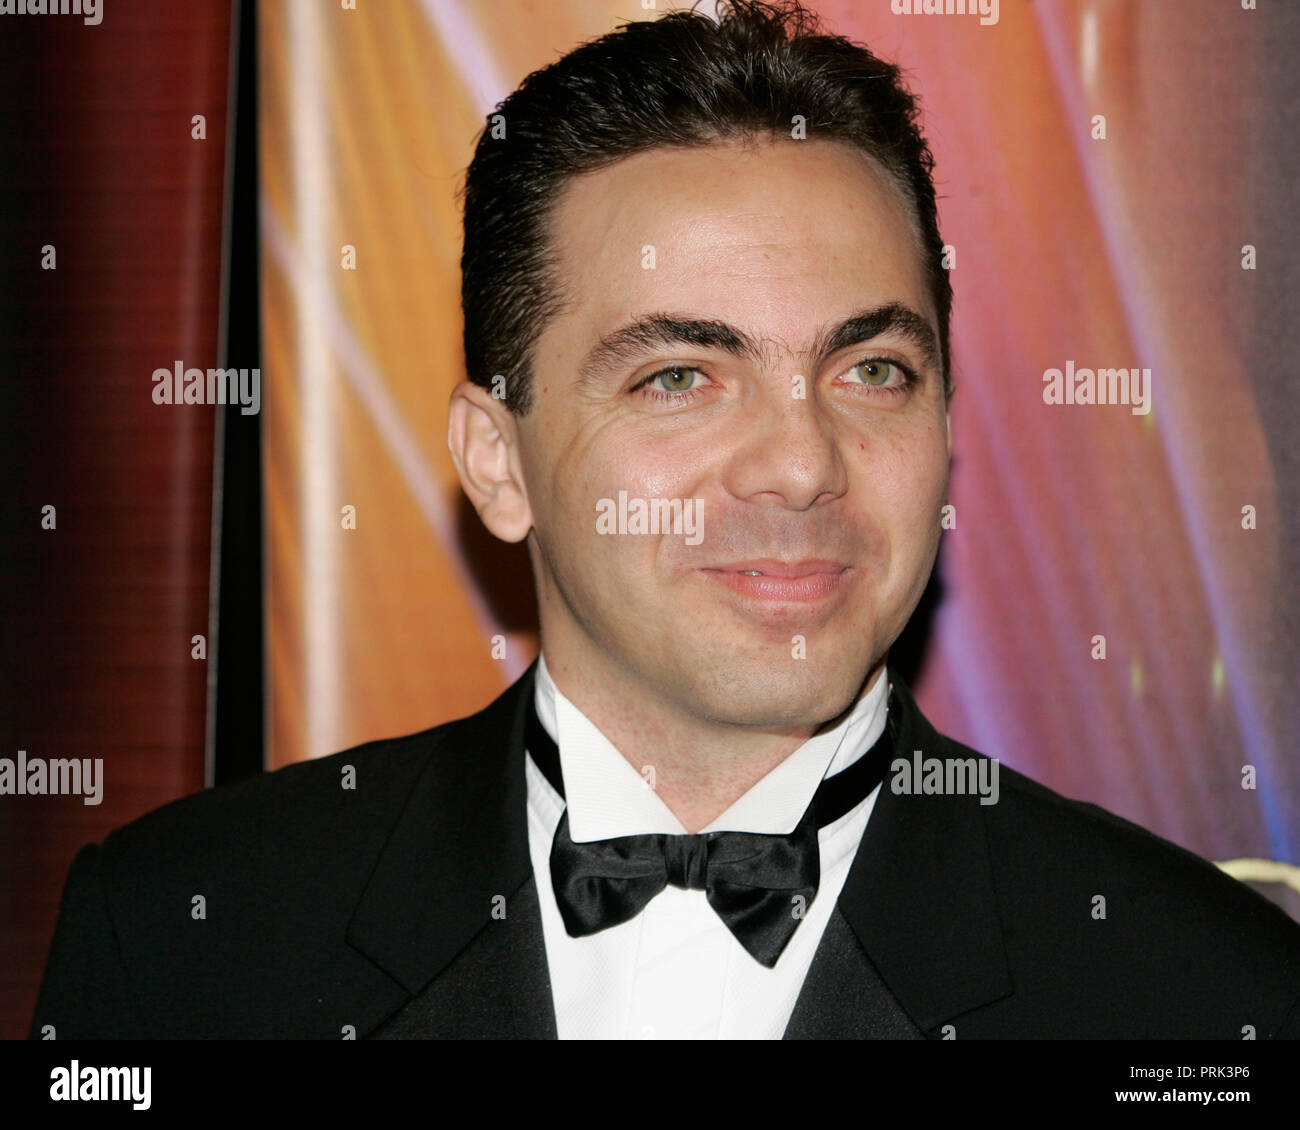 Cristian Castro arrives on the red carpet for the Latin Grammy Celebra Nuestra Musica show at the Univision studios in Miami, Florida on September 7, 2006. Stock Photo